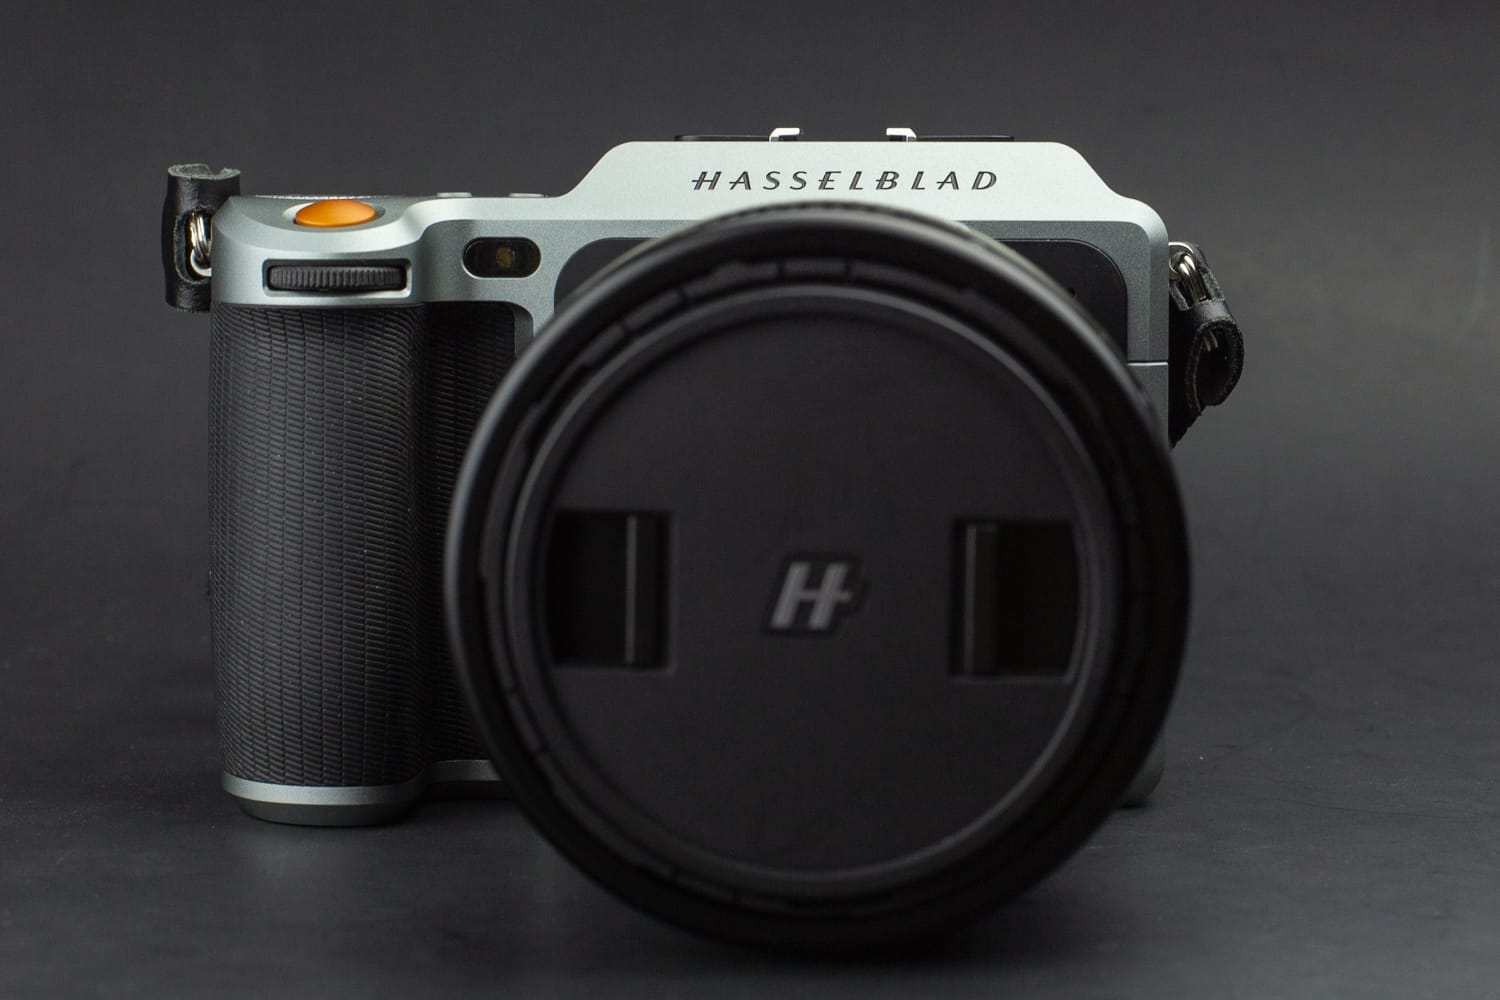 Hands-On Review of the Hasselblad X1D-50c Medium Format Mirrorless Camera